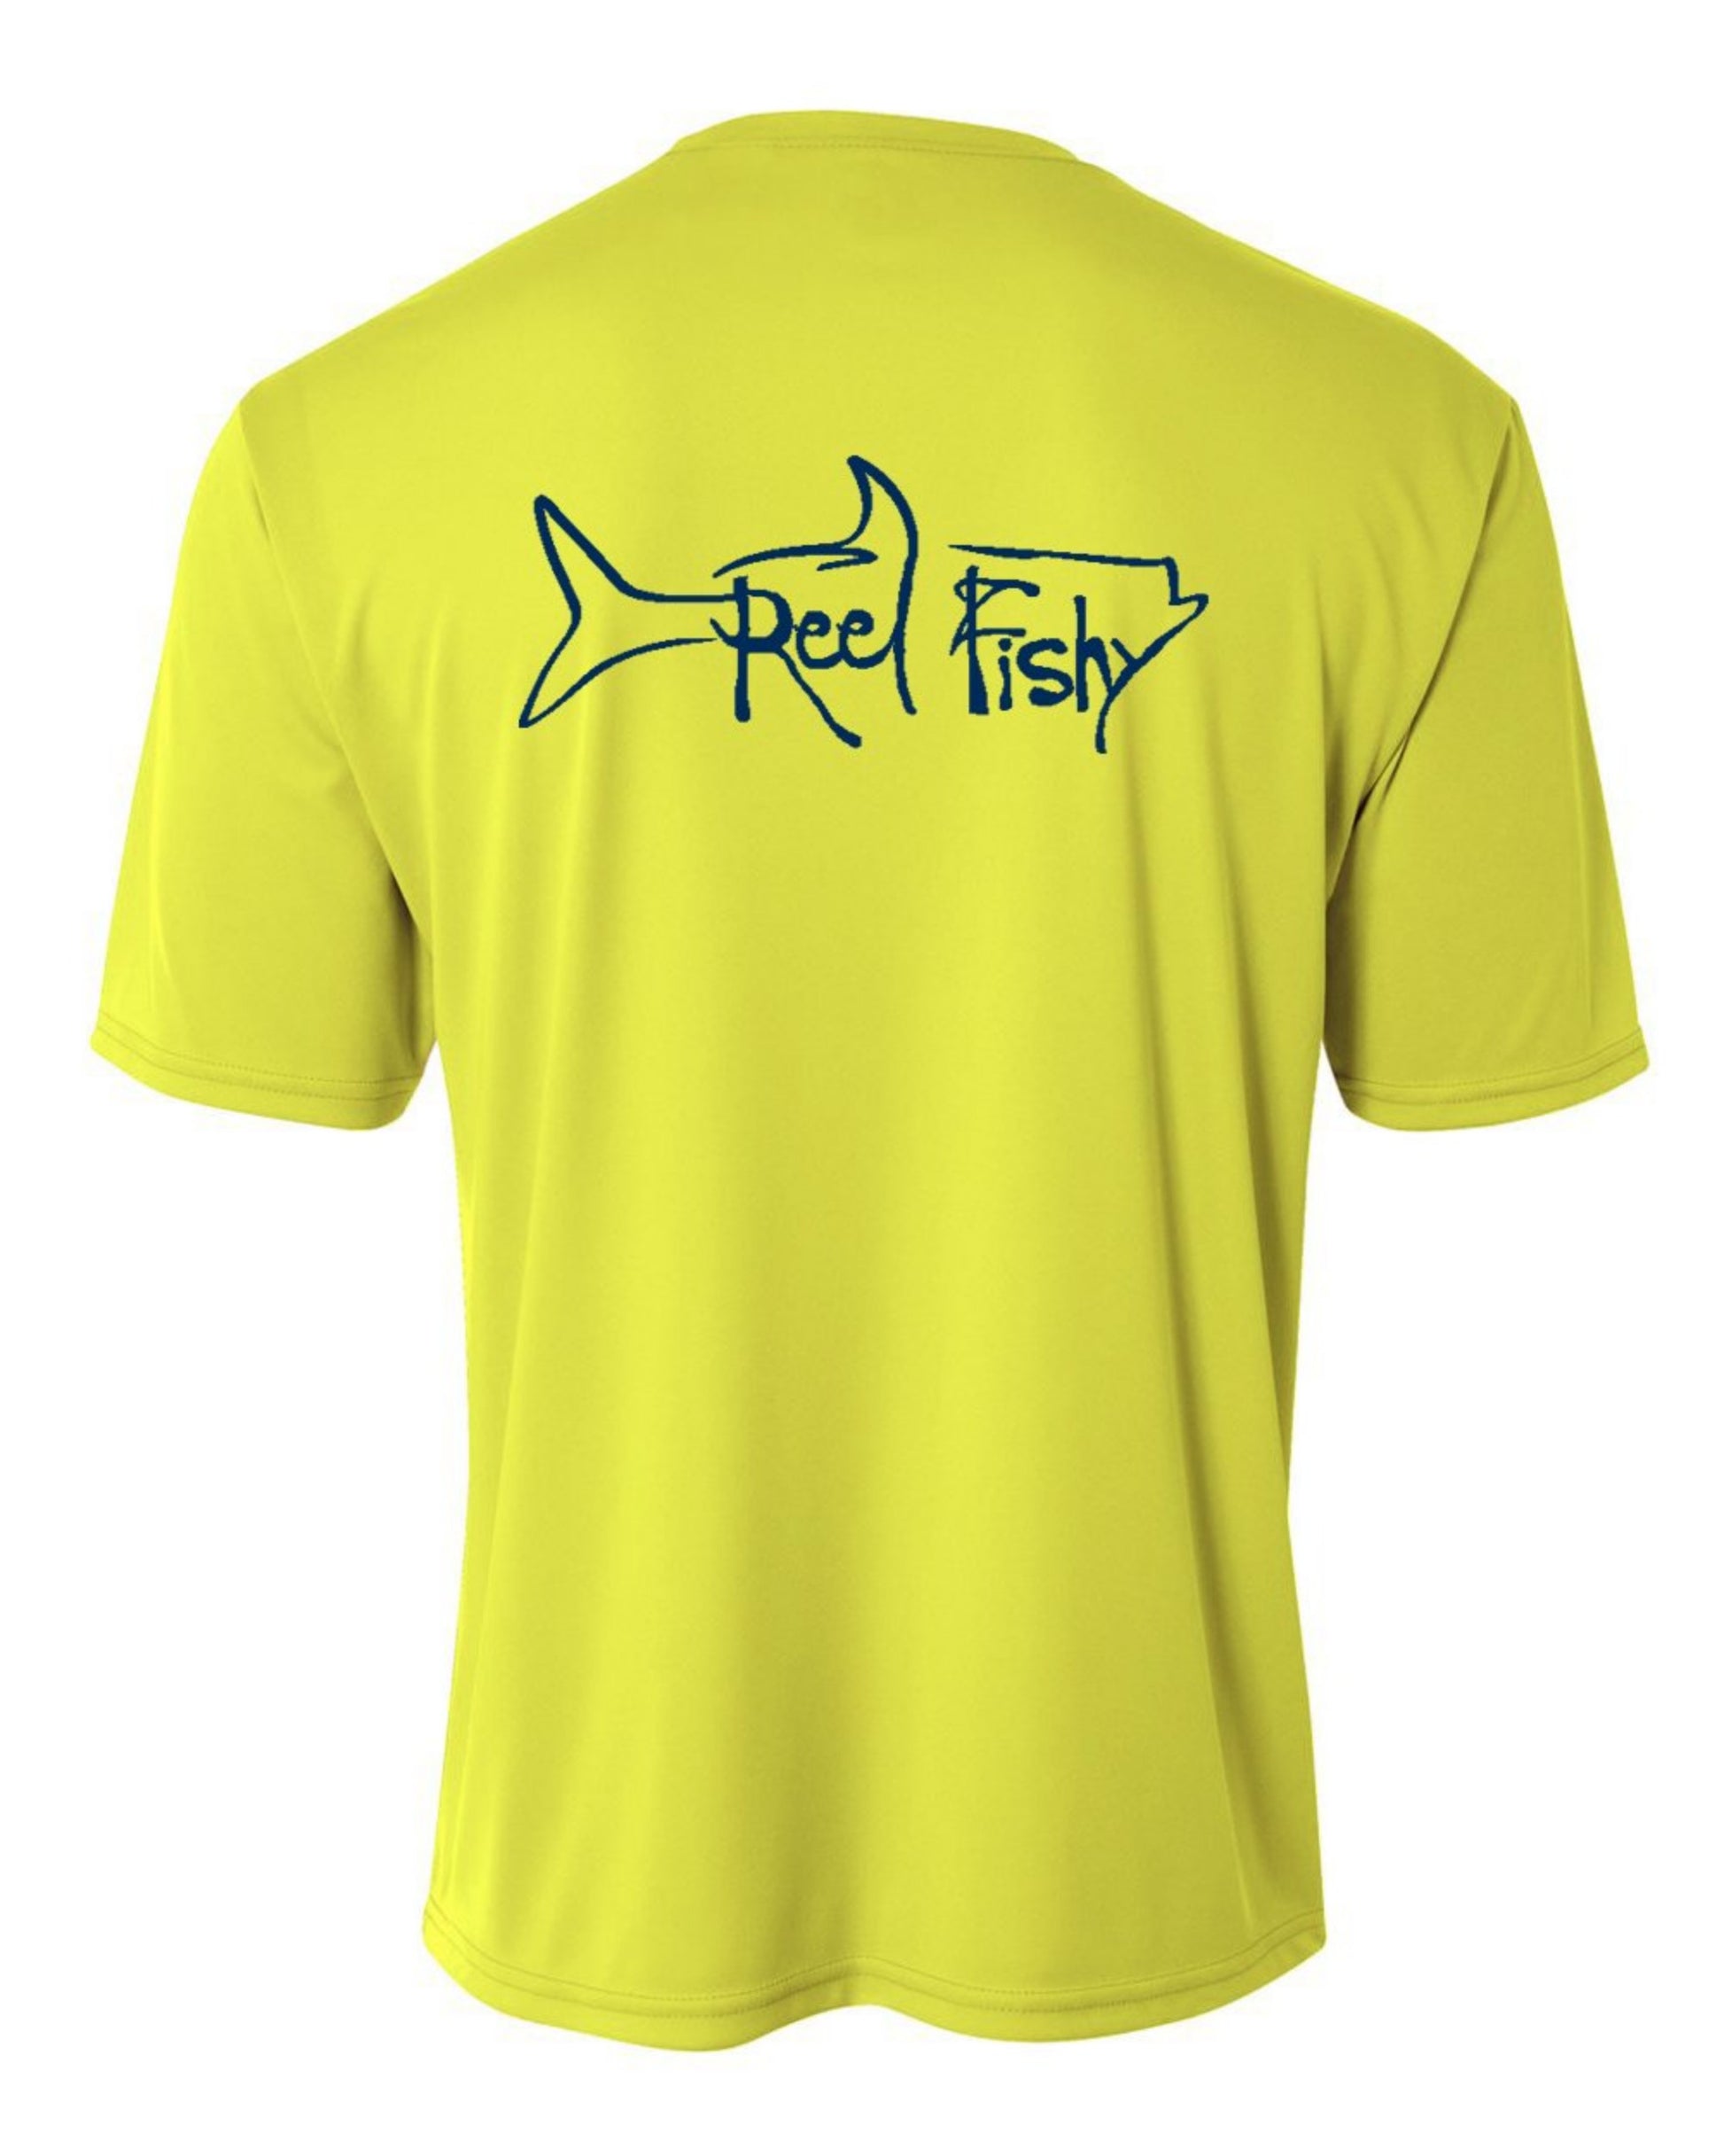 Youth Performance Dry-Fit Tarpon Fishing Shirts 50+Upf Sun Protection - Reel Fishy Apparel S / Neon Green S/S